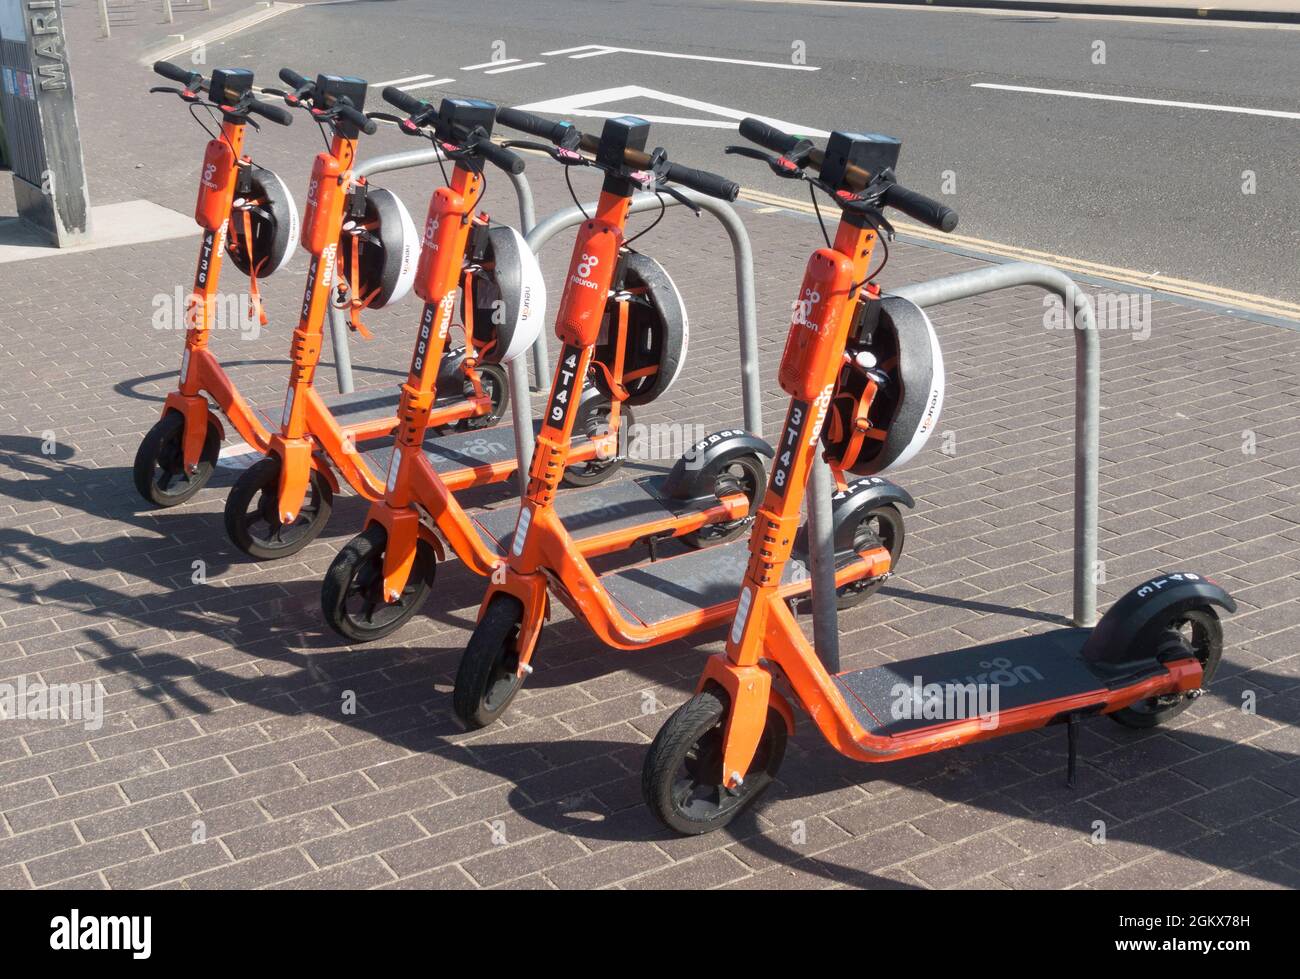 A row of Neuron electric scooters, seen at Roker in Sunderland, England, UK Stock Photo